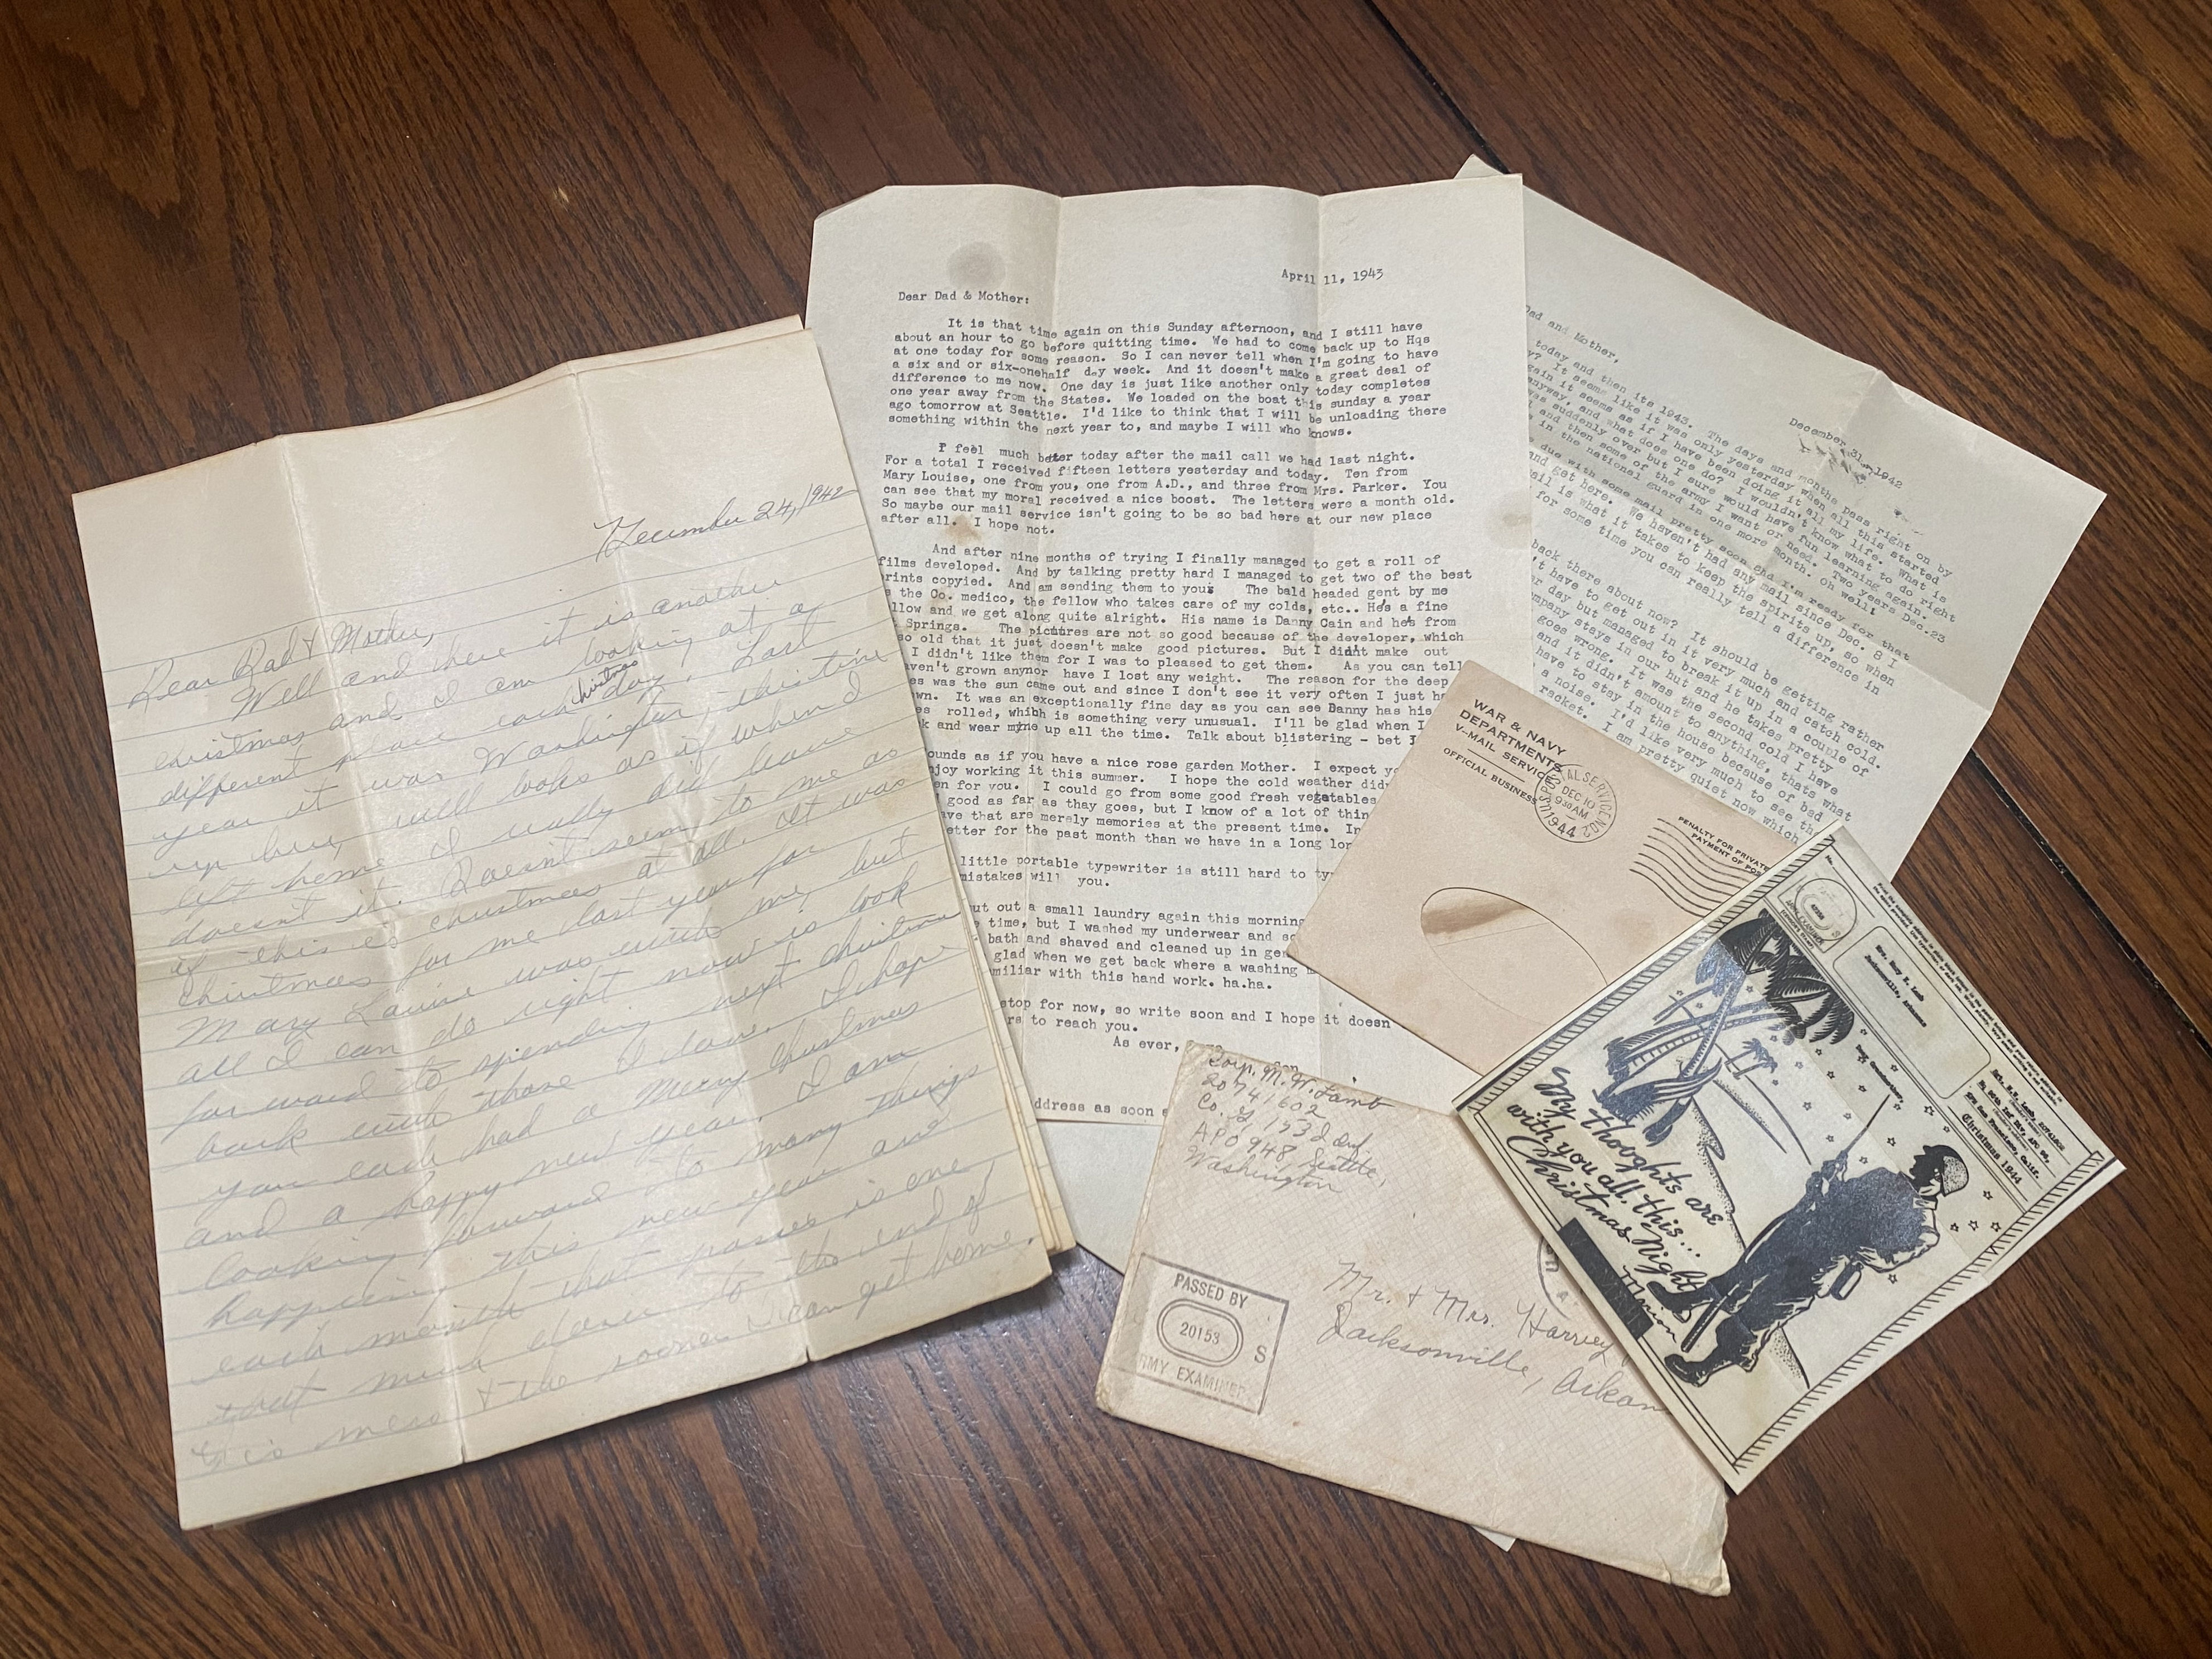 postal worker finds wwii-era letters, drives 5 hours to deliver them